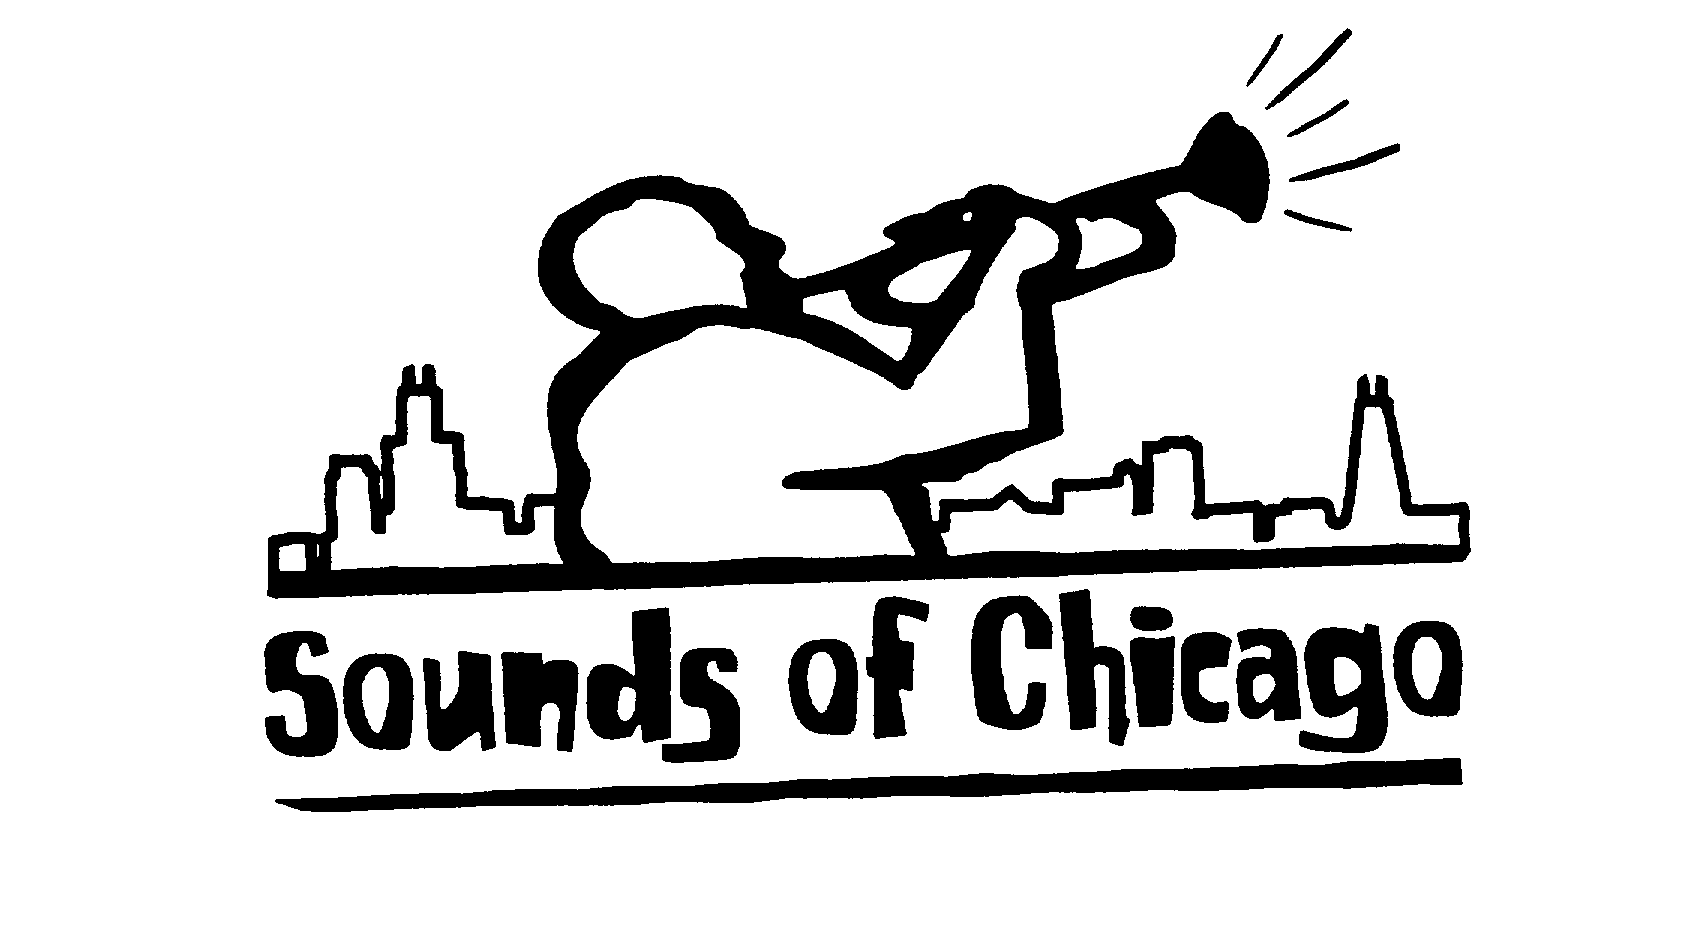  SOUNDS OF CHICAGO